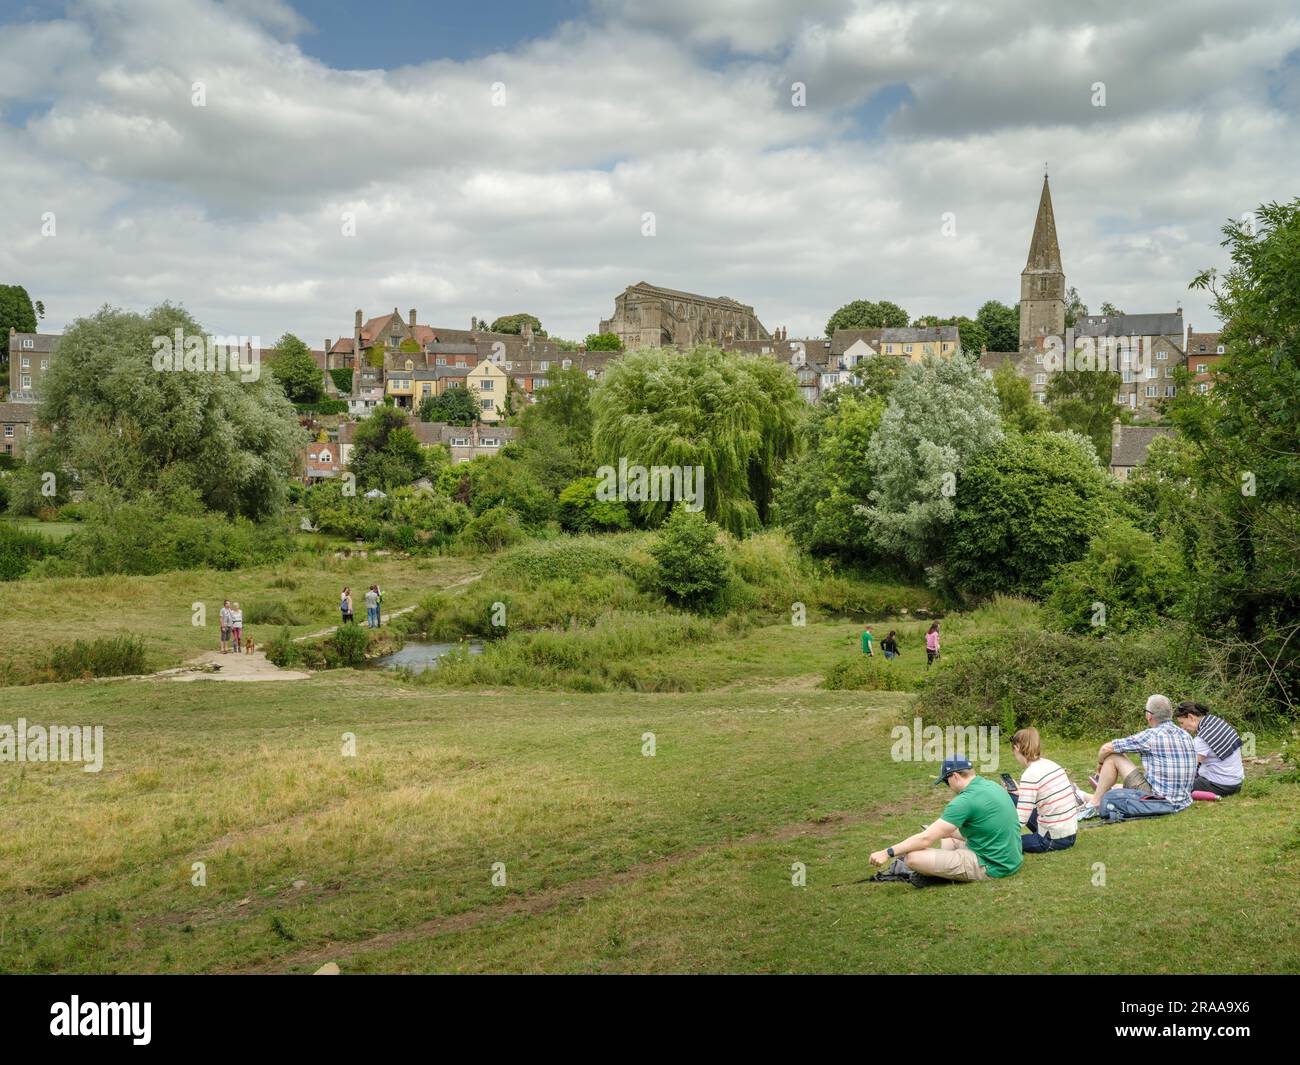 Sunday 2nd July 2023. Malmesbury, Wiltshire, England - On a warm summers day, people enjoy the sunshine and a gentle breeze on the river walk at the picturesque Wiltshire market town of Malmesbury. Credit: Terry Mathews/Alamy Live News Stock Photo